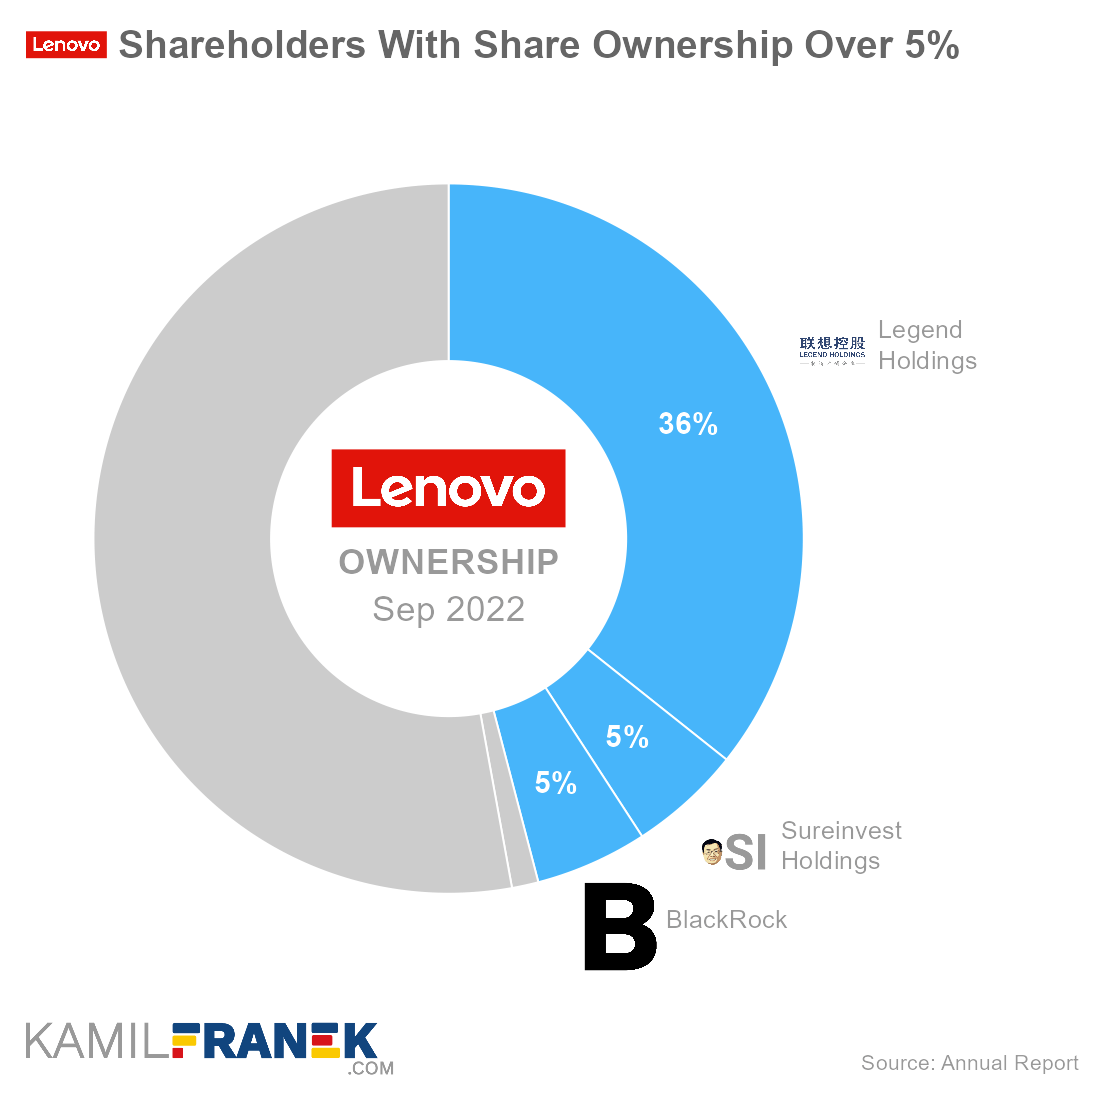 Lenovo largest shareholders by share ownership and vote control (donut chart)